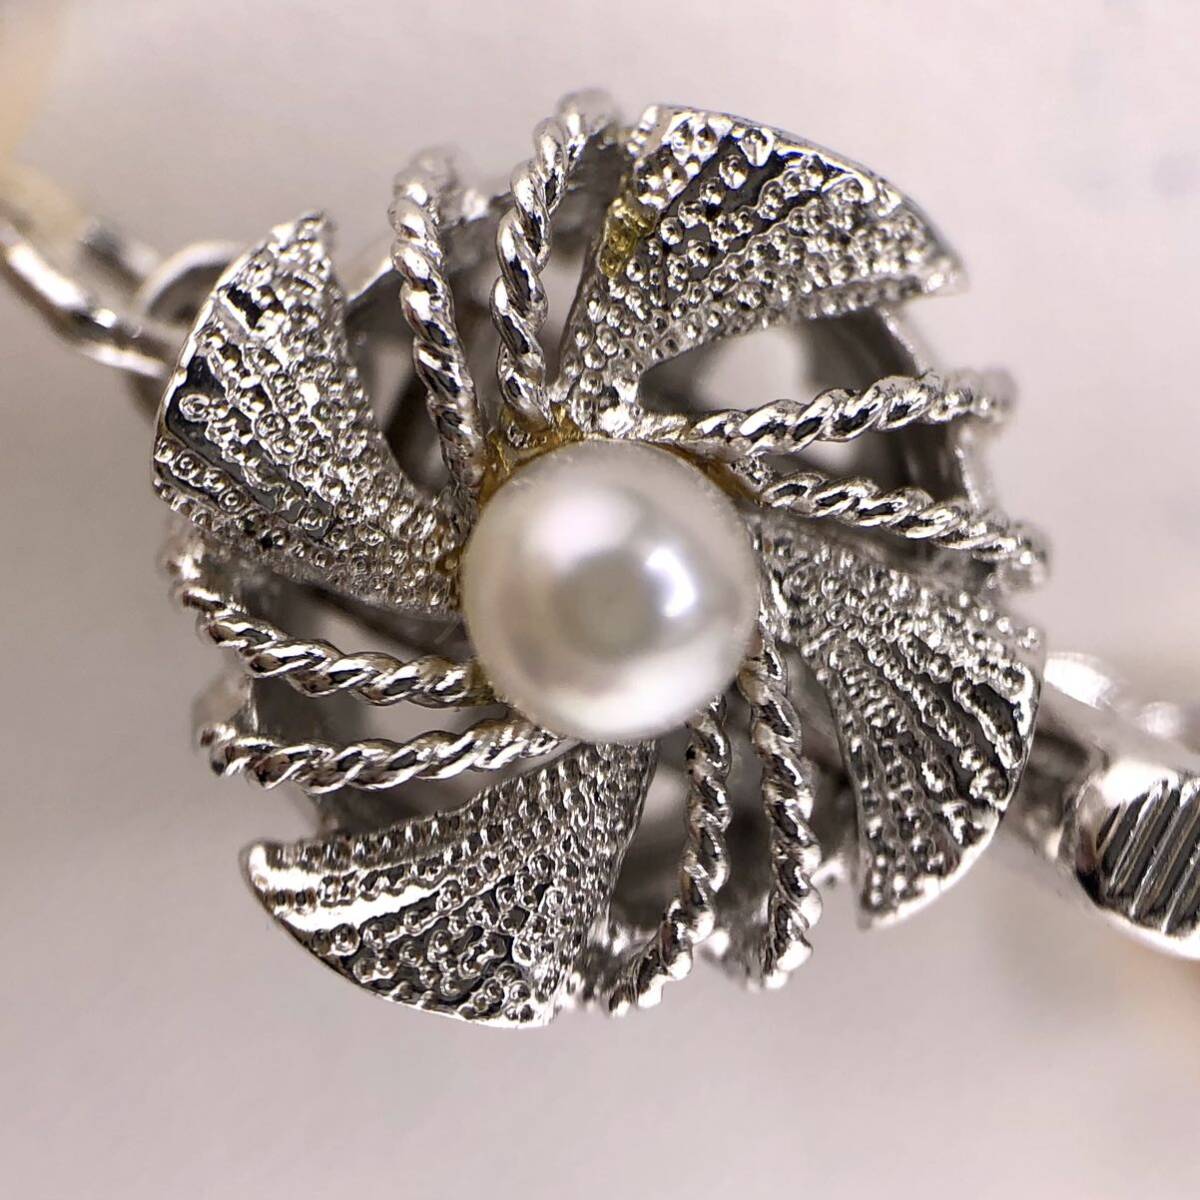 E04-5519 アコヤパールネックレス 6.5mm~7.0mm 38cm 26.5g ( アコヤ真珠 Pearl necklace SILVER )の画像3